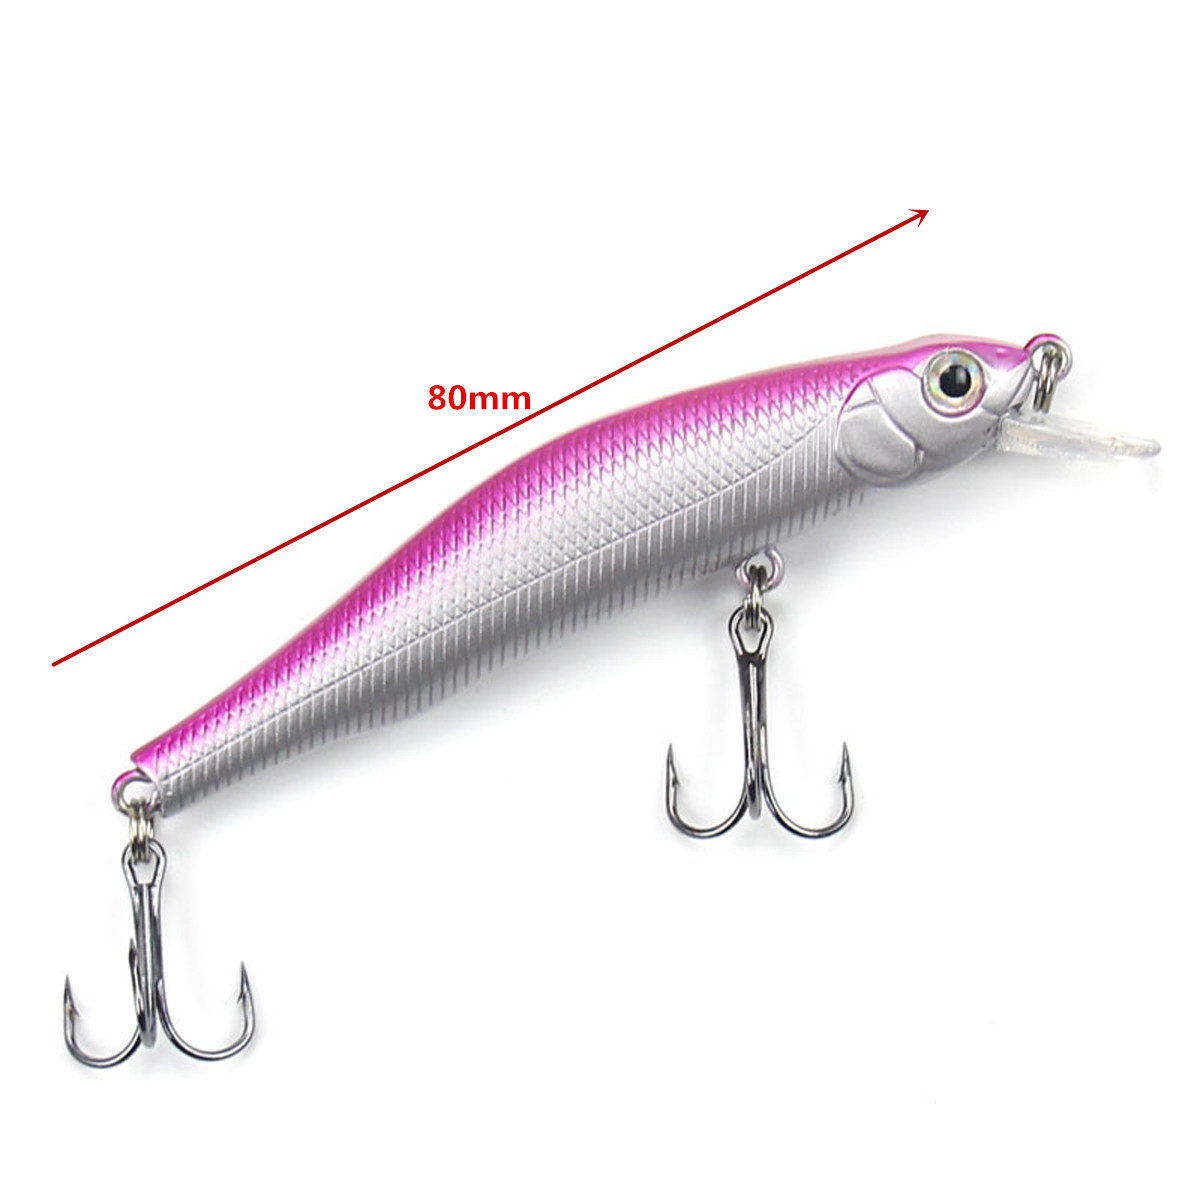 ZANLURE-1pc-80mm315quot-85g-Magnet-Minnow-Fishing-Lure-Artificial-Hard-Bait-Hook-3D-Eyes-Sea-Fishing-1314538-7